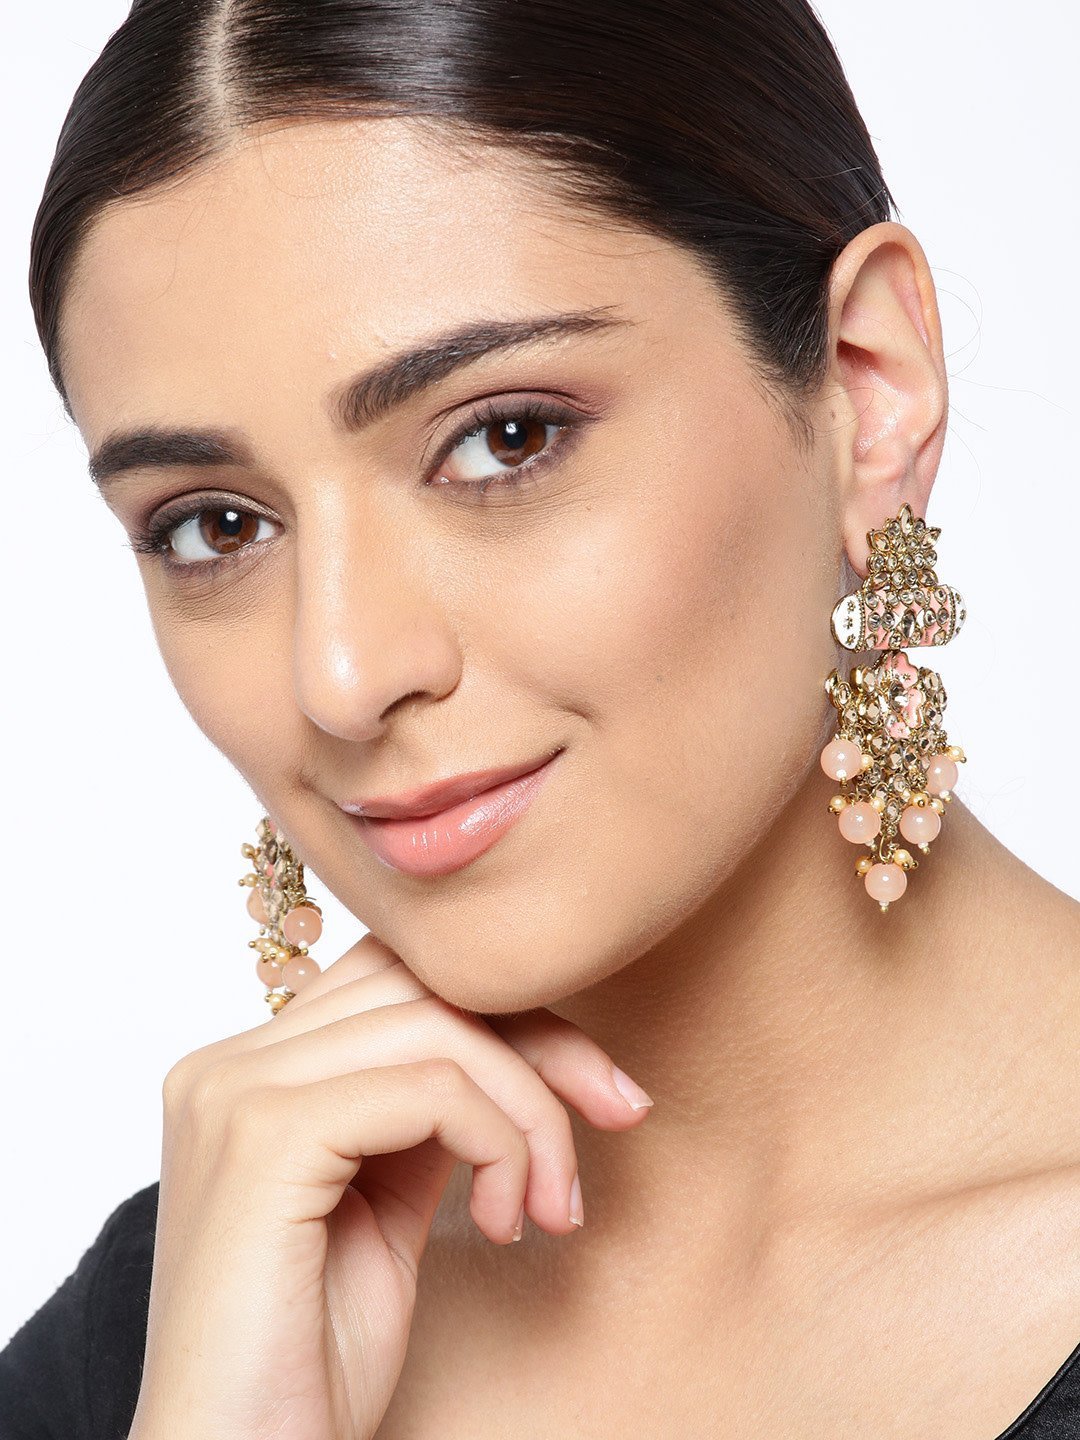 Women's Gold-Plated Stone Studded Meenakari Earrings with Beads Drop in Peach Color - Priyaasi